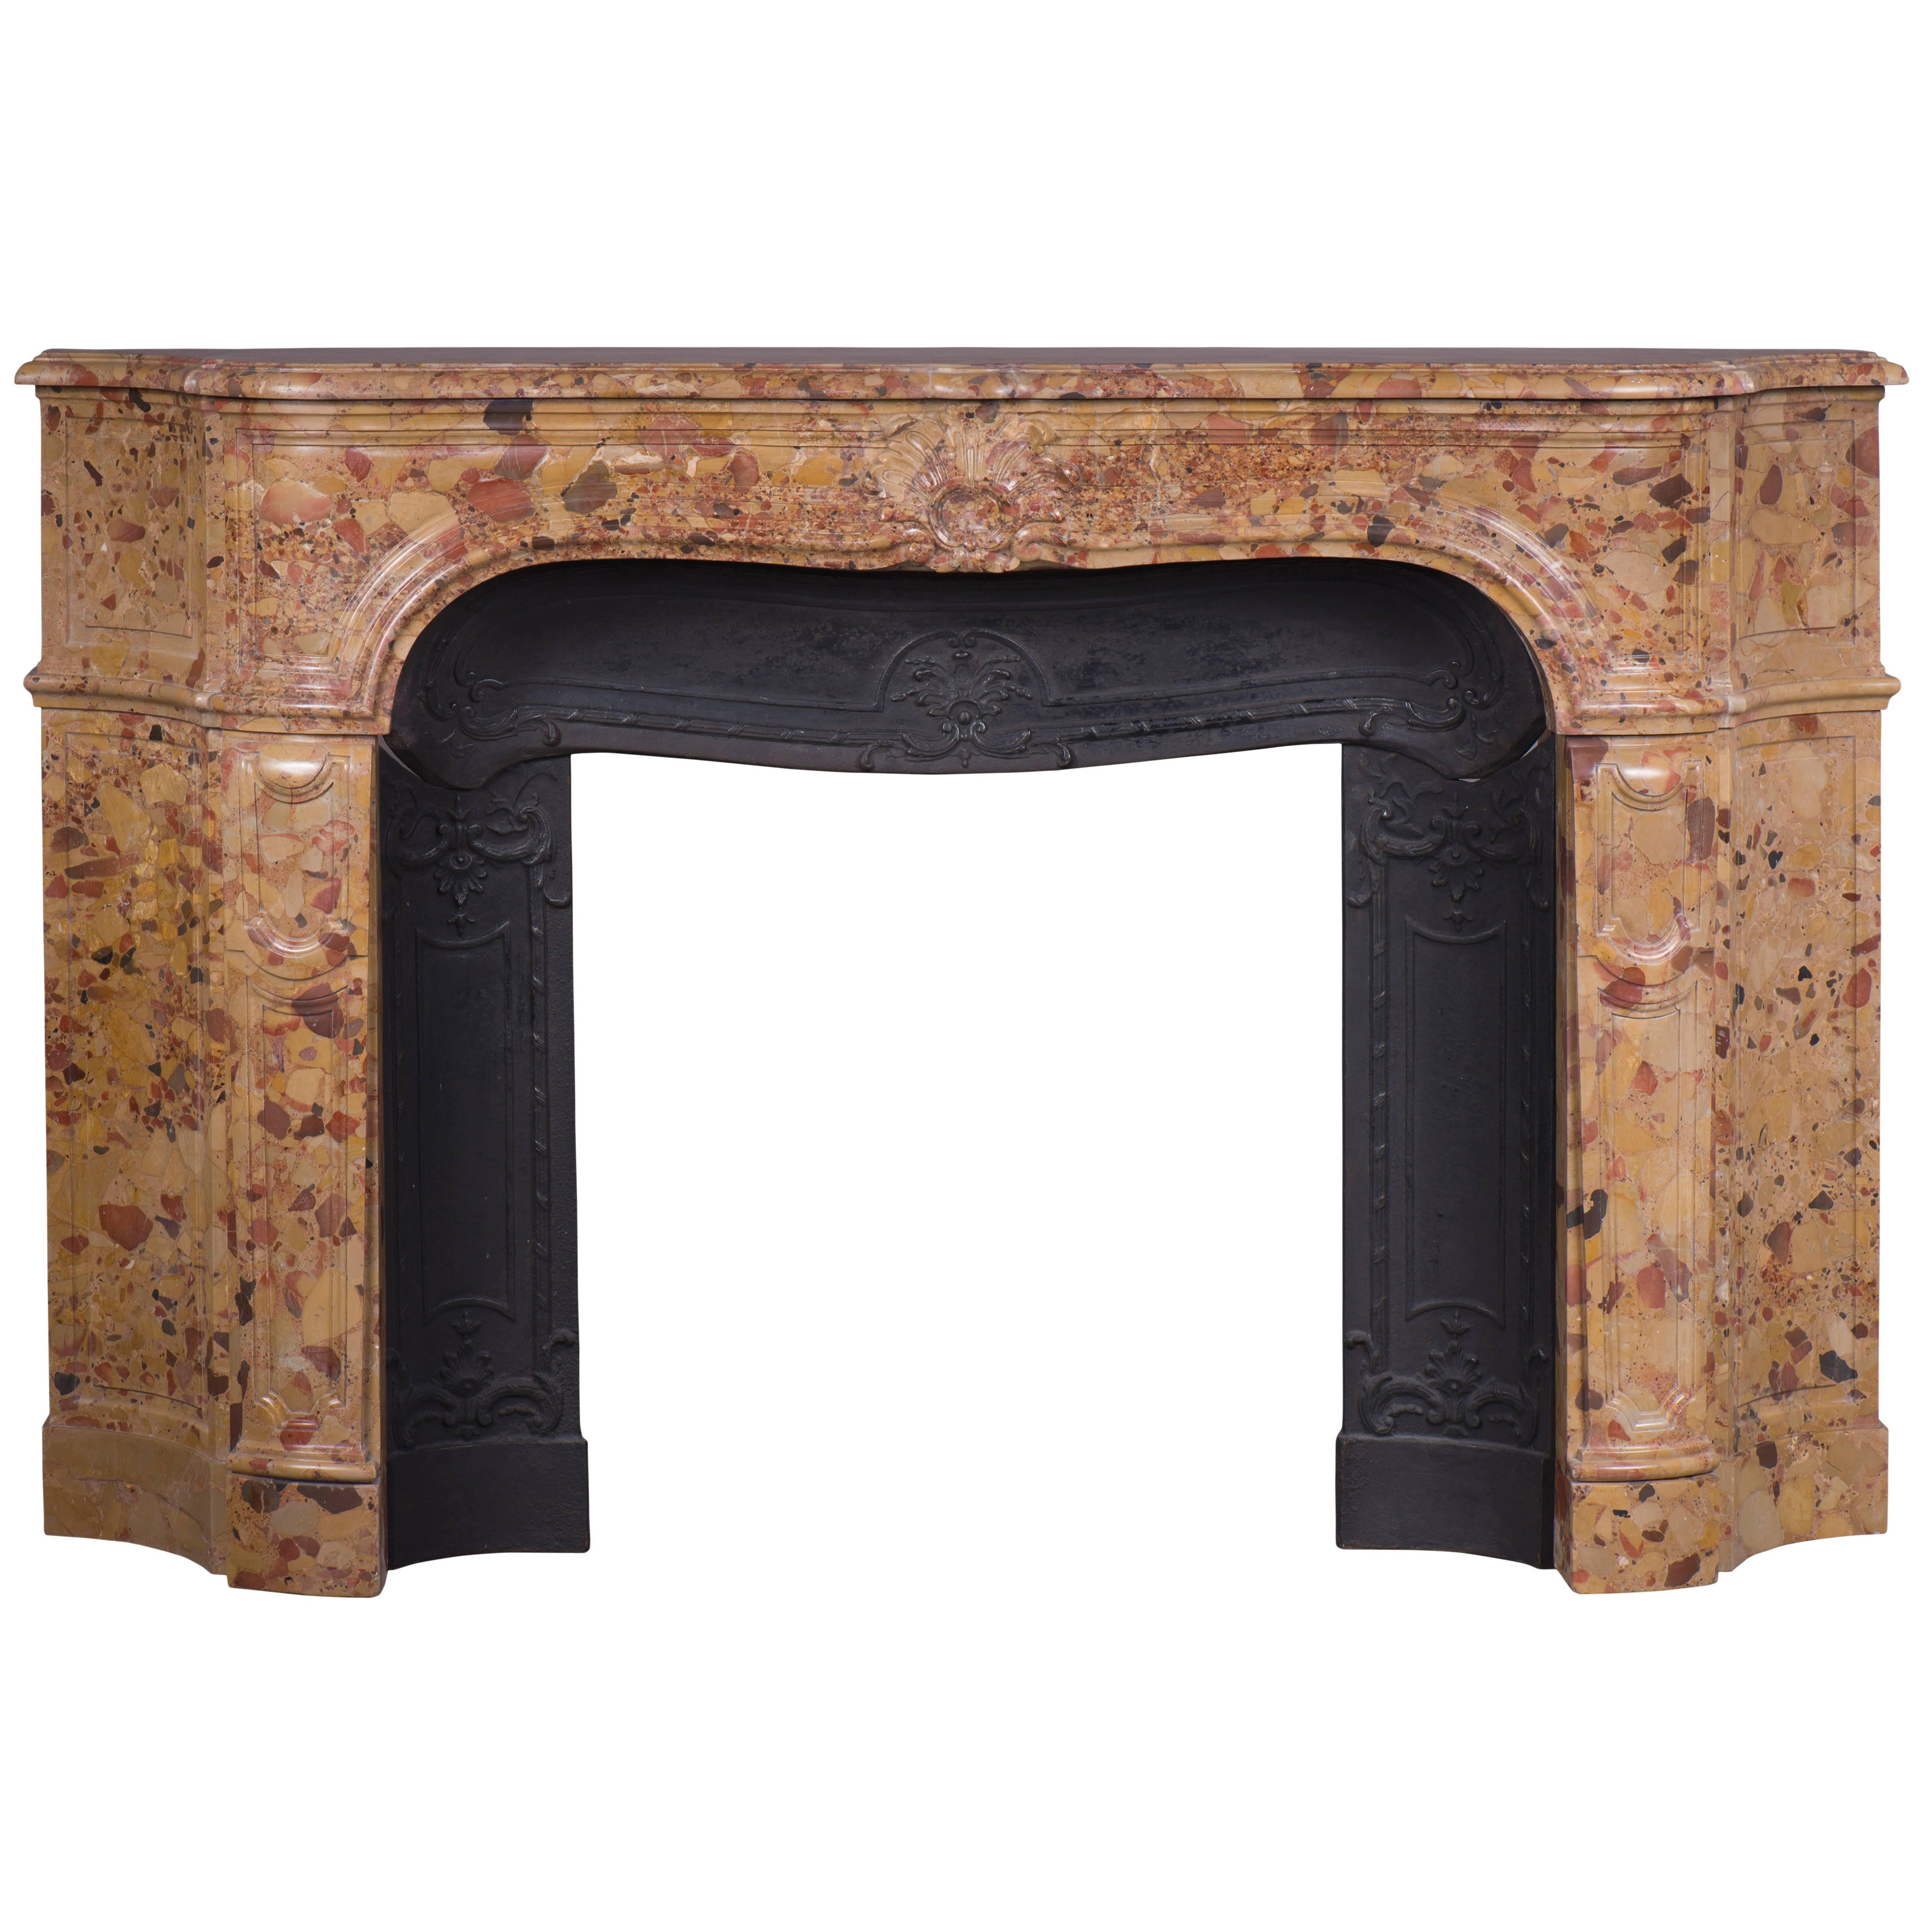 Regence Style Fireplace in Aleppo Breccia Marble, Early 19th Century For Sale